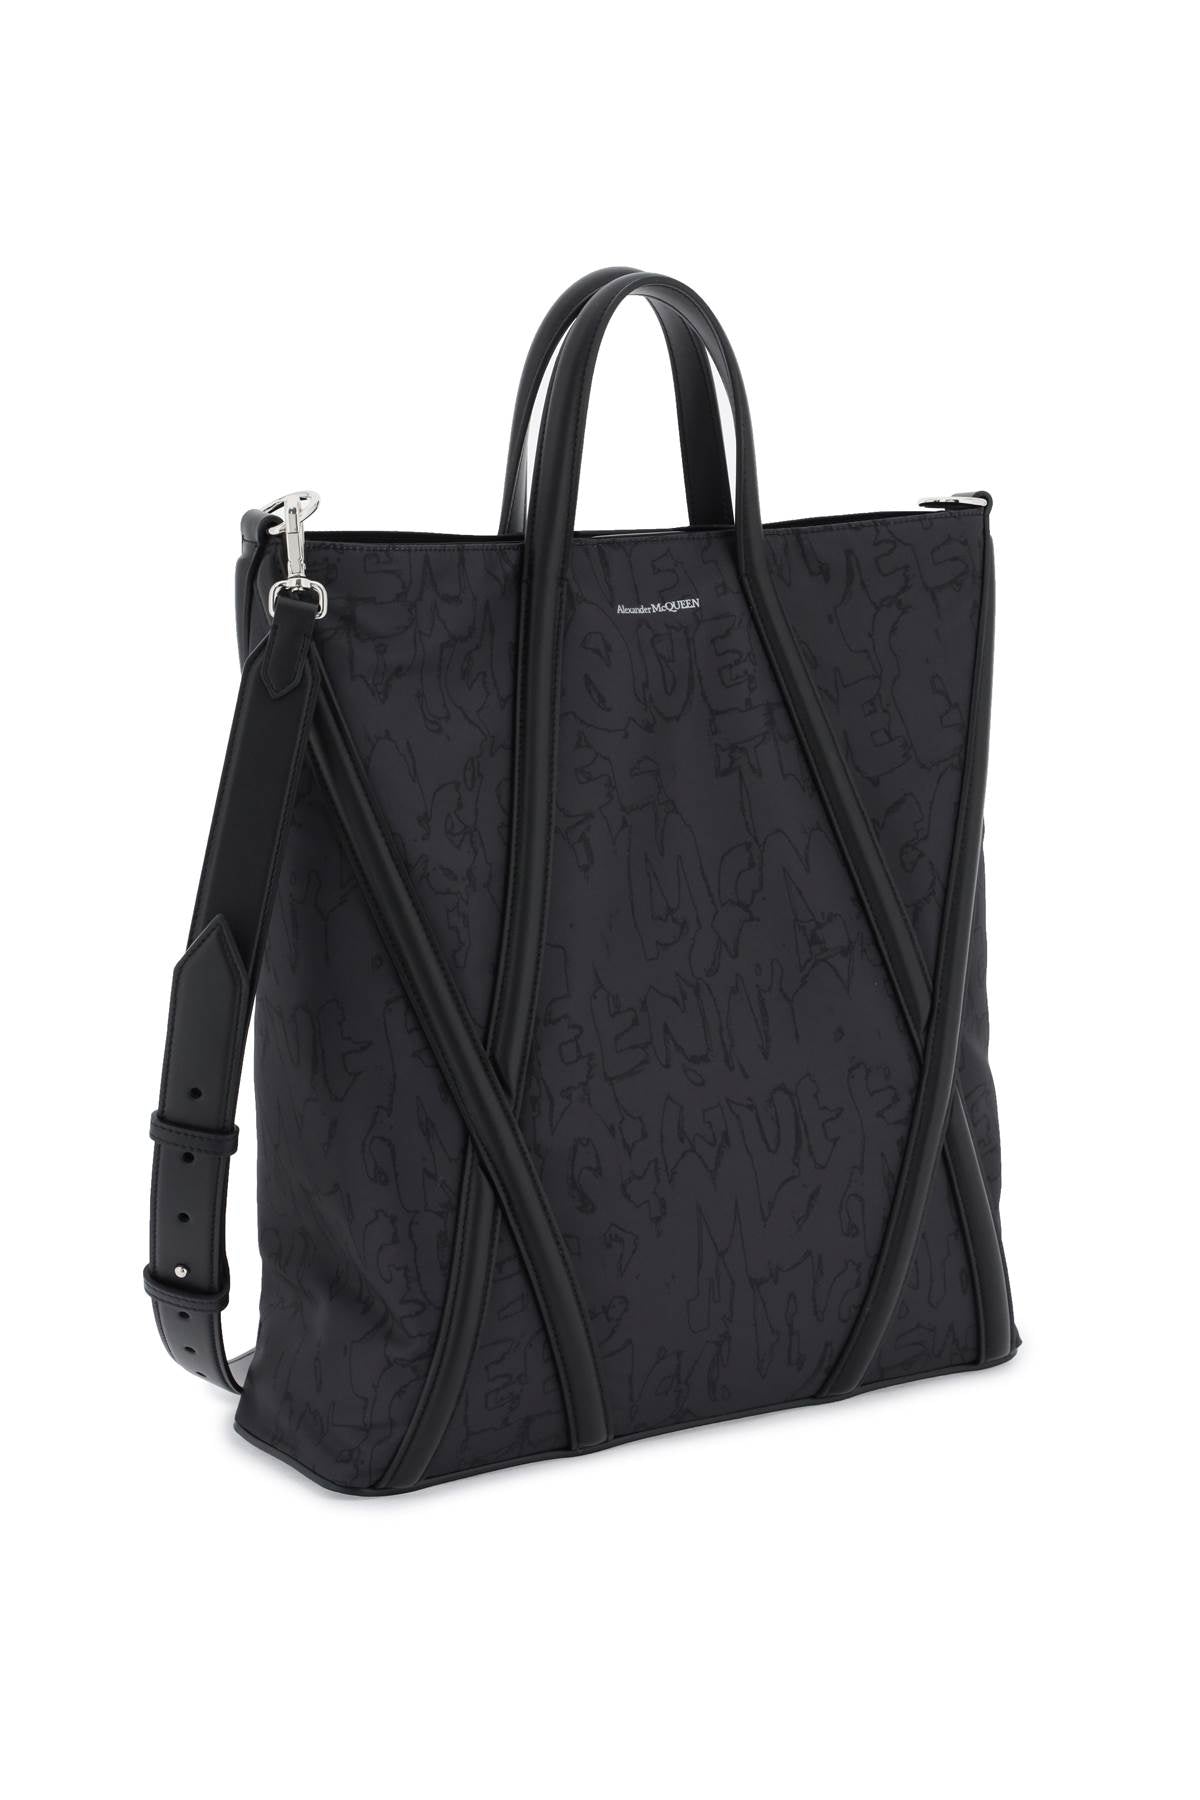 ALEXANDER MCQUEEN Men's Black Nylon Tote Bag with All-Over Graffiti Print and Harness Detail